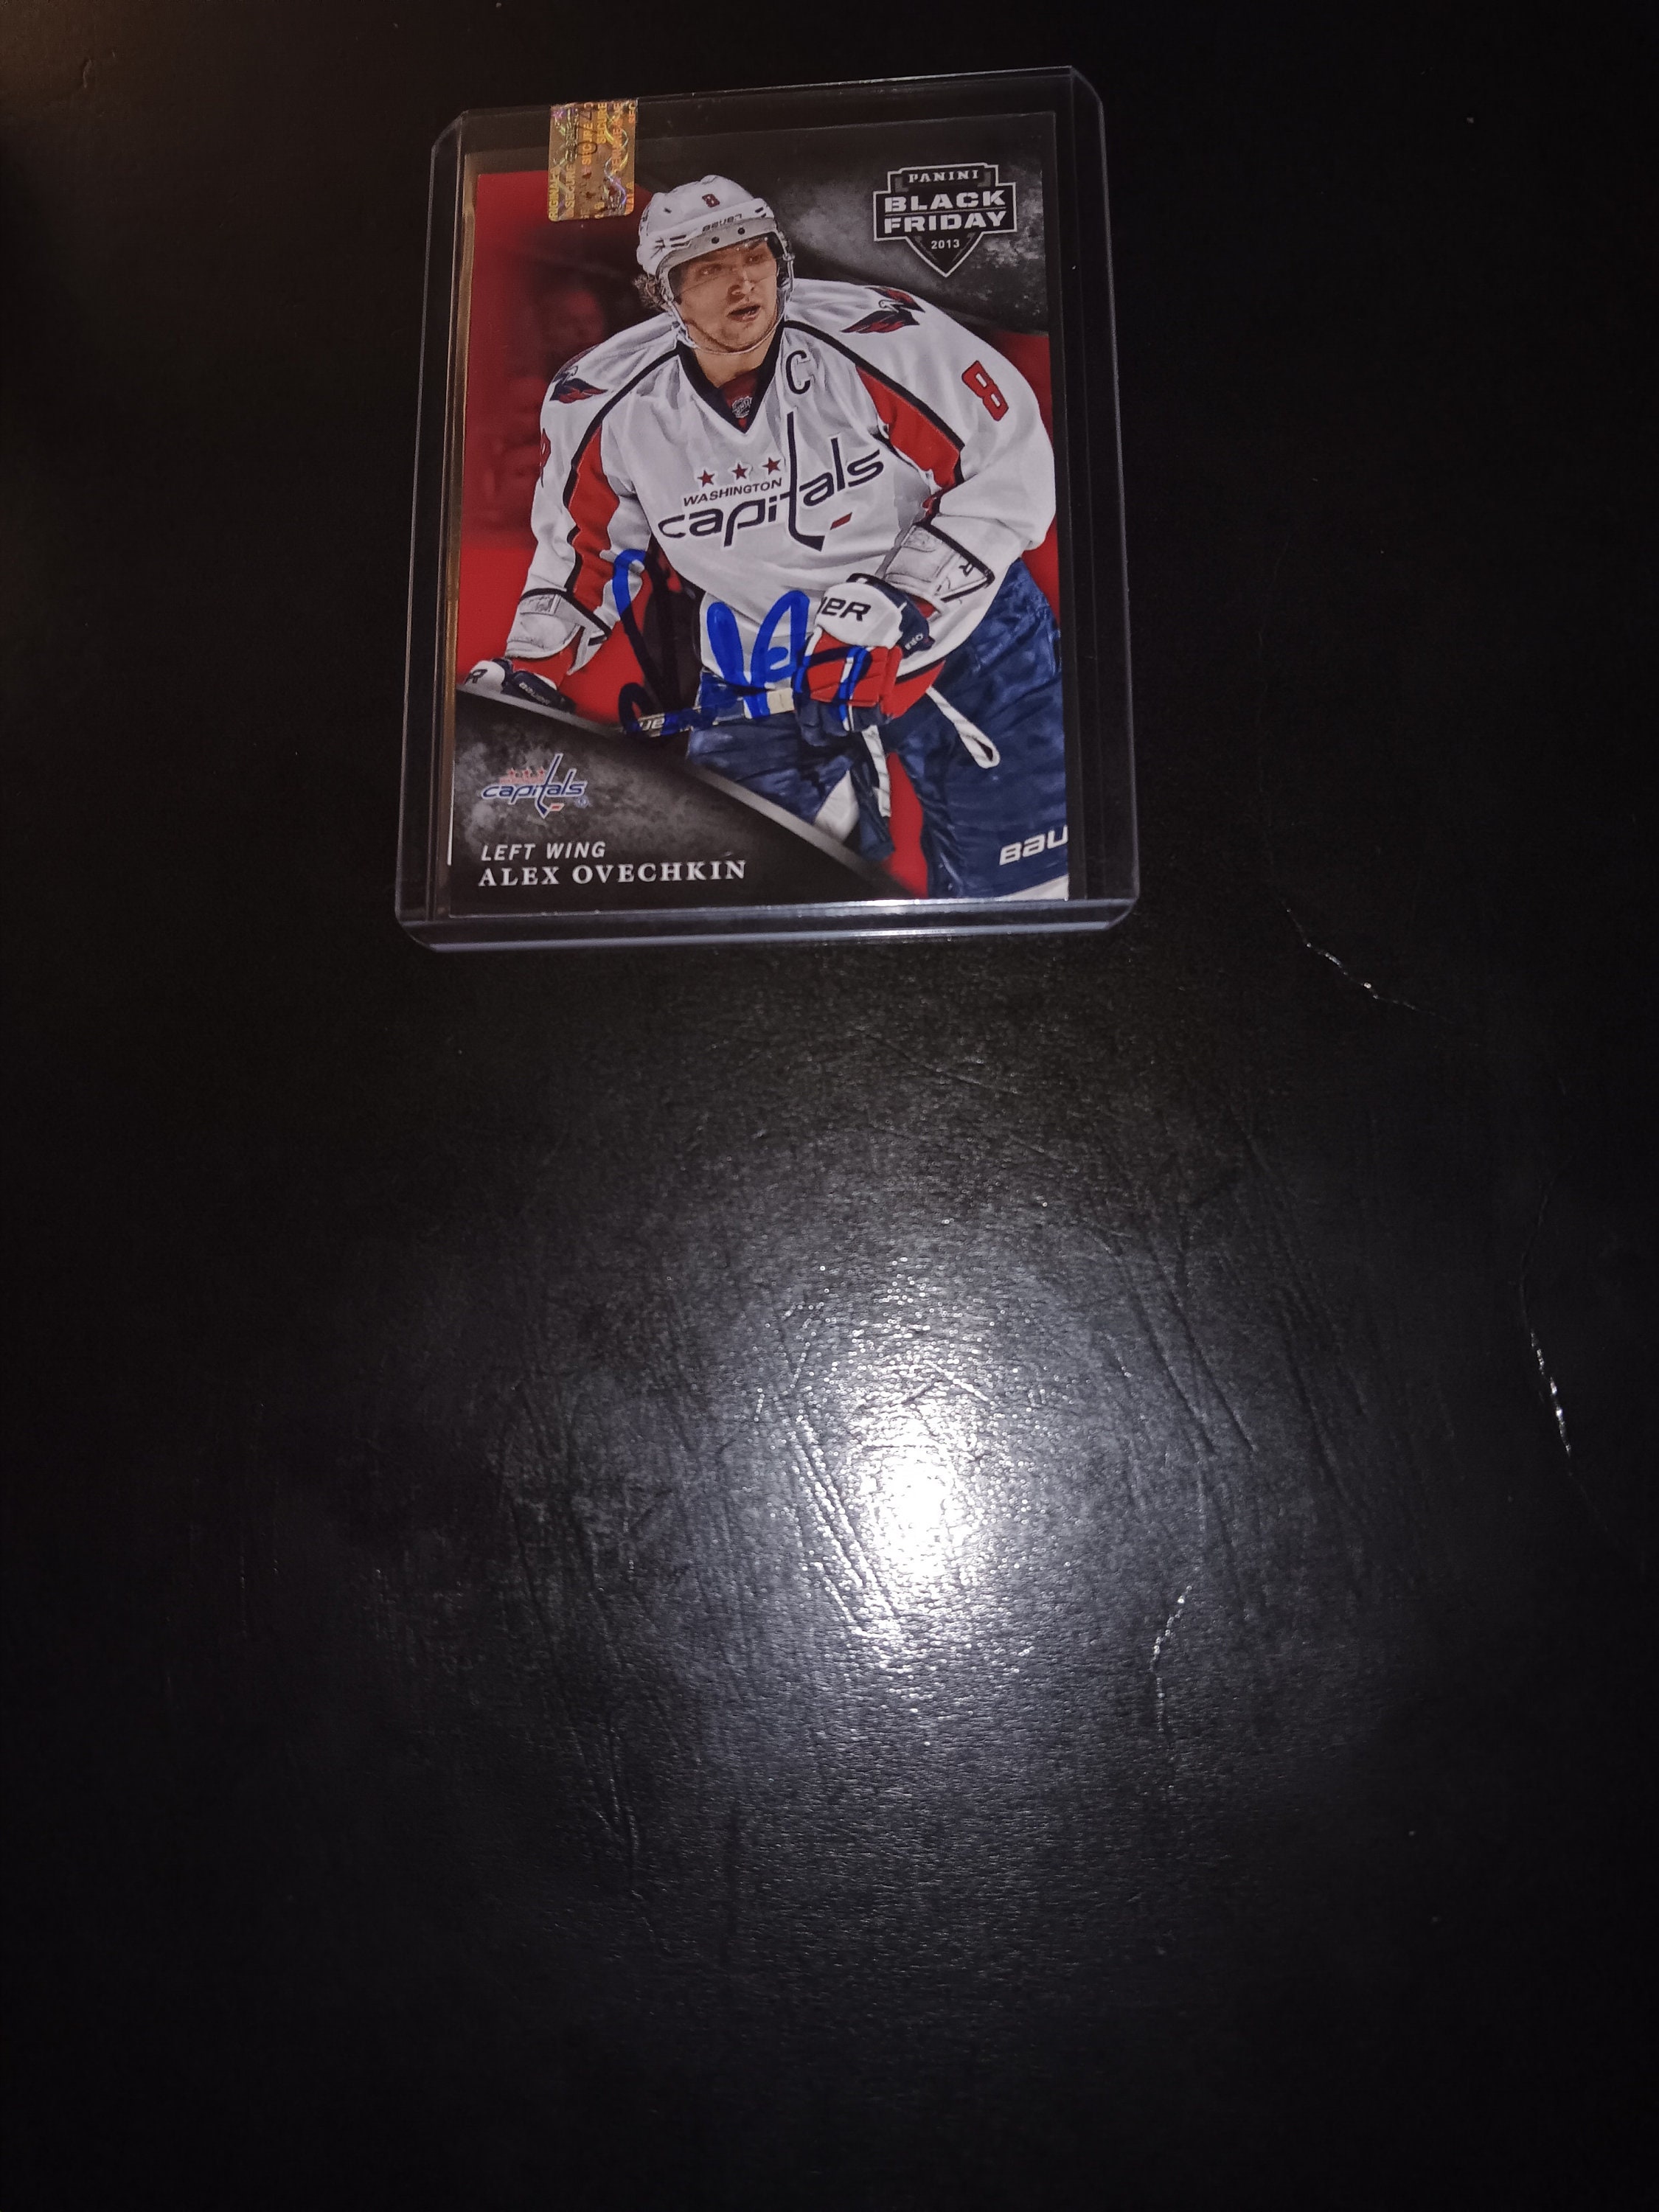 FRAMED Autographed/Signed ALEXANDER OVECHKIN 33x42 Washington Red